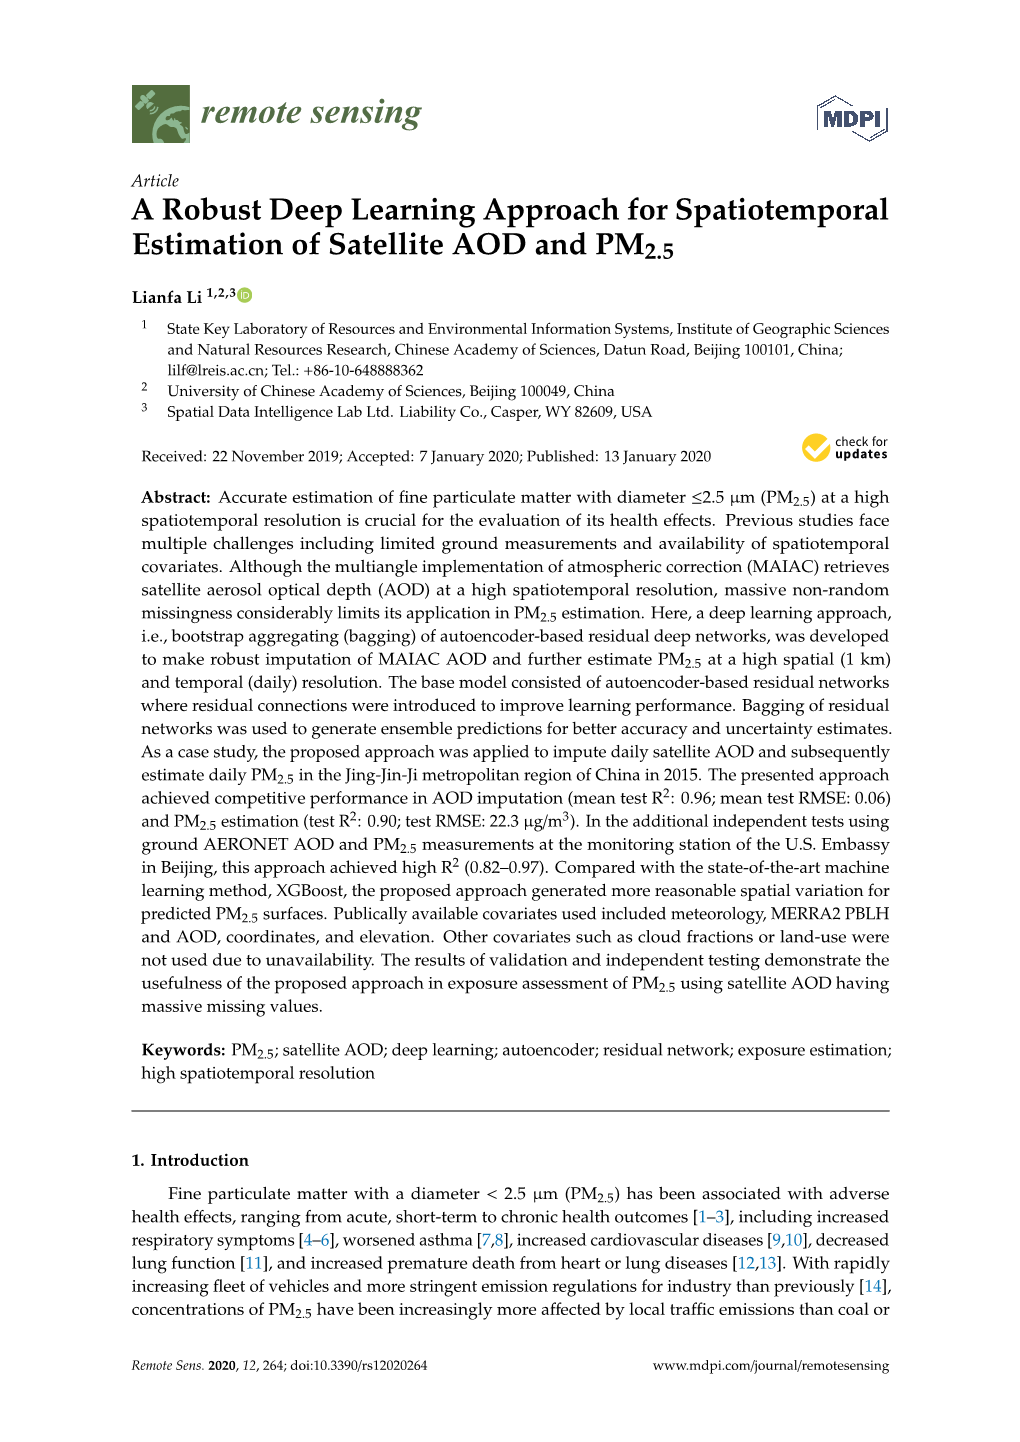 A Robust Deep Learning Approach for Spatiotemporal Estimation of Satellite AOD and PM2.5